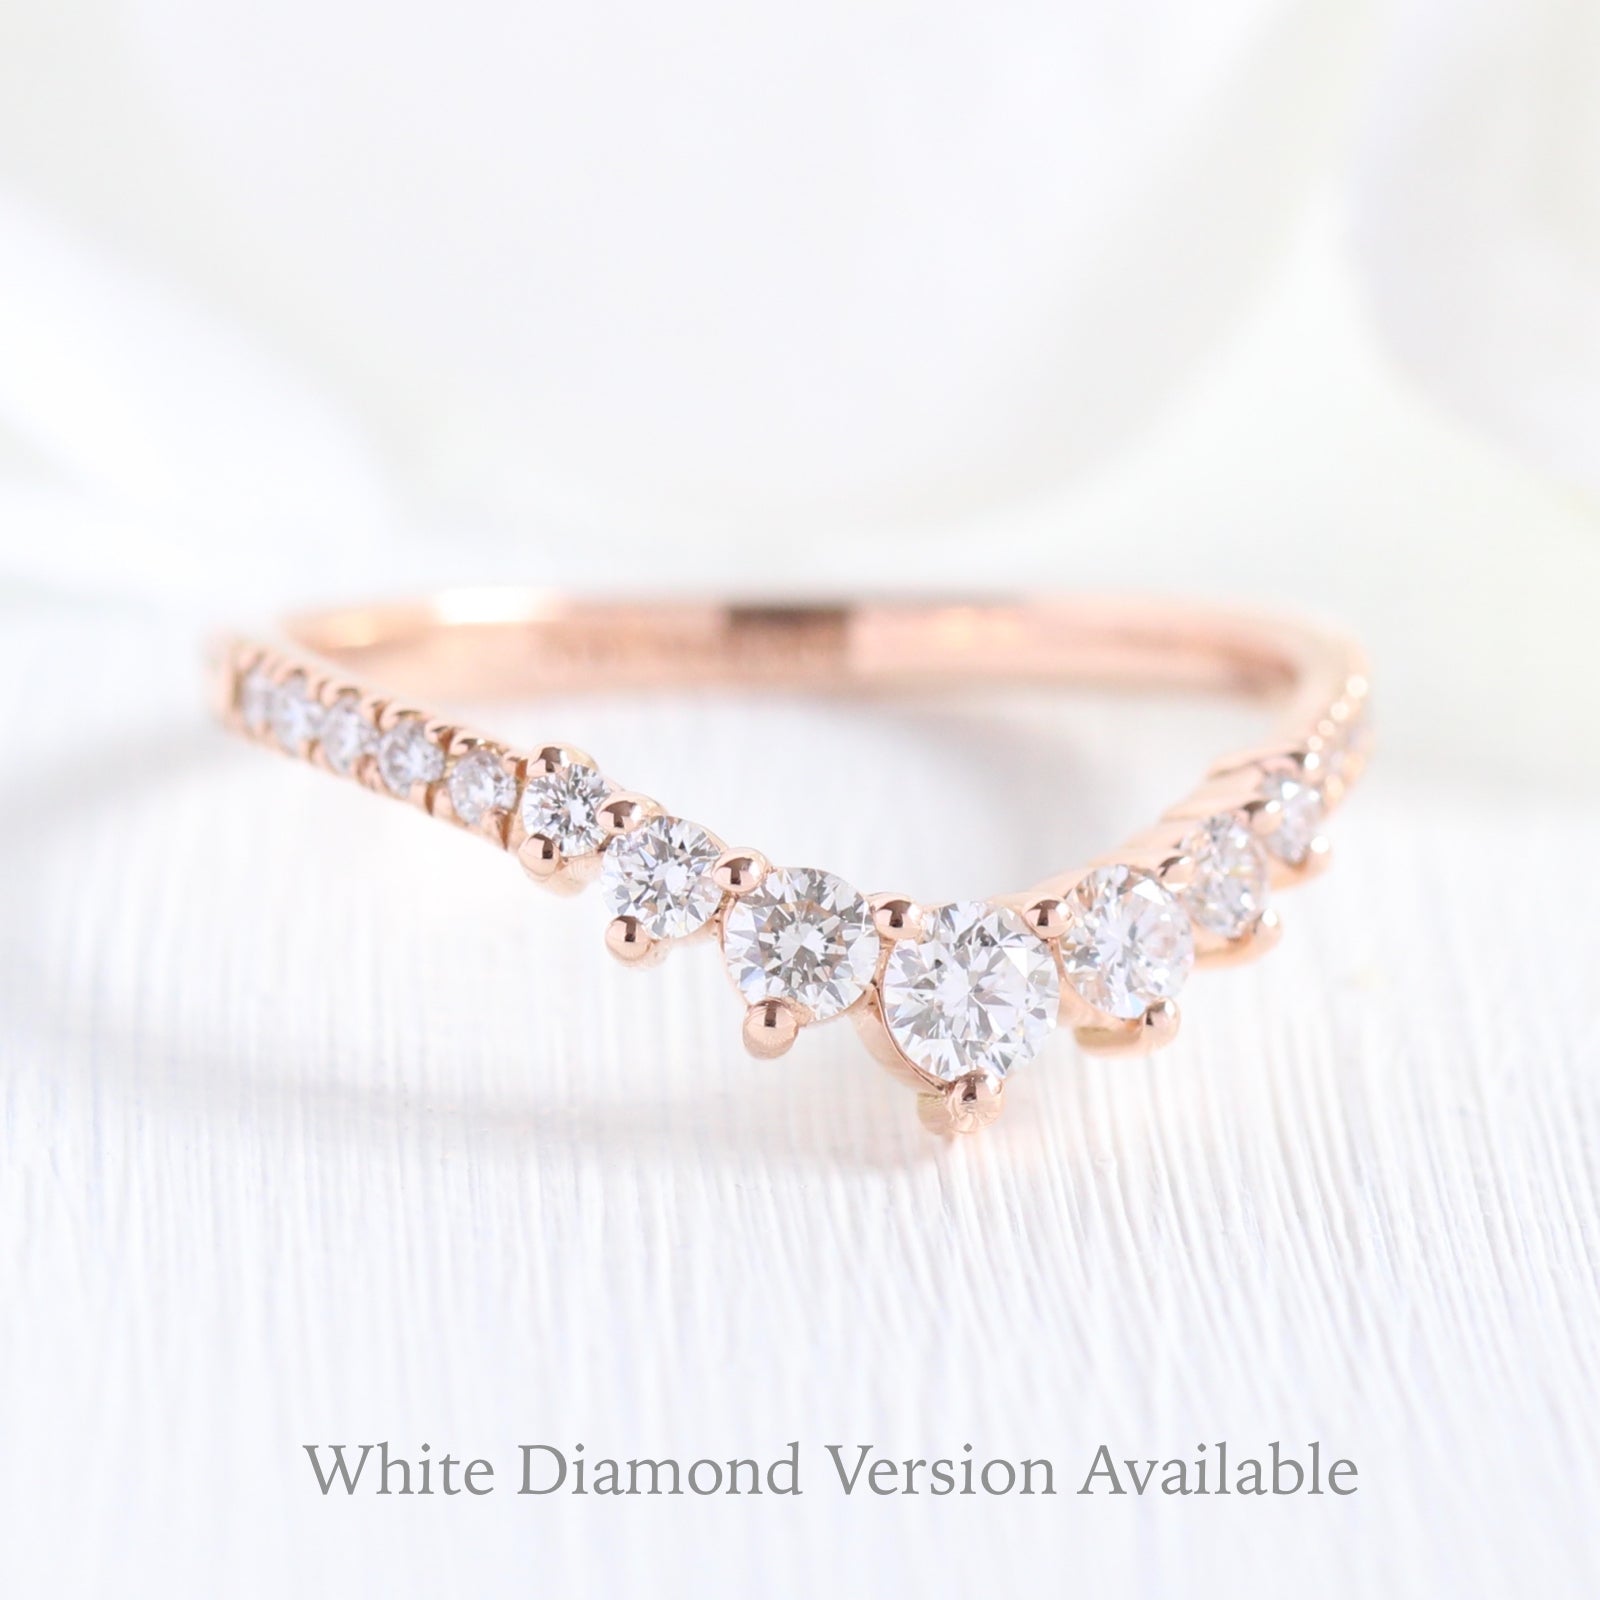 rose gold curved diamond wedding band in 7 stone diamond ring by la more design jewelry